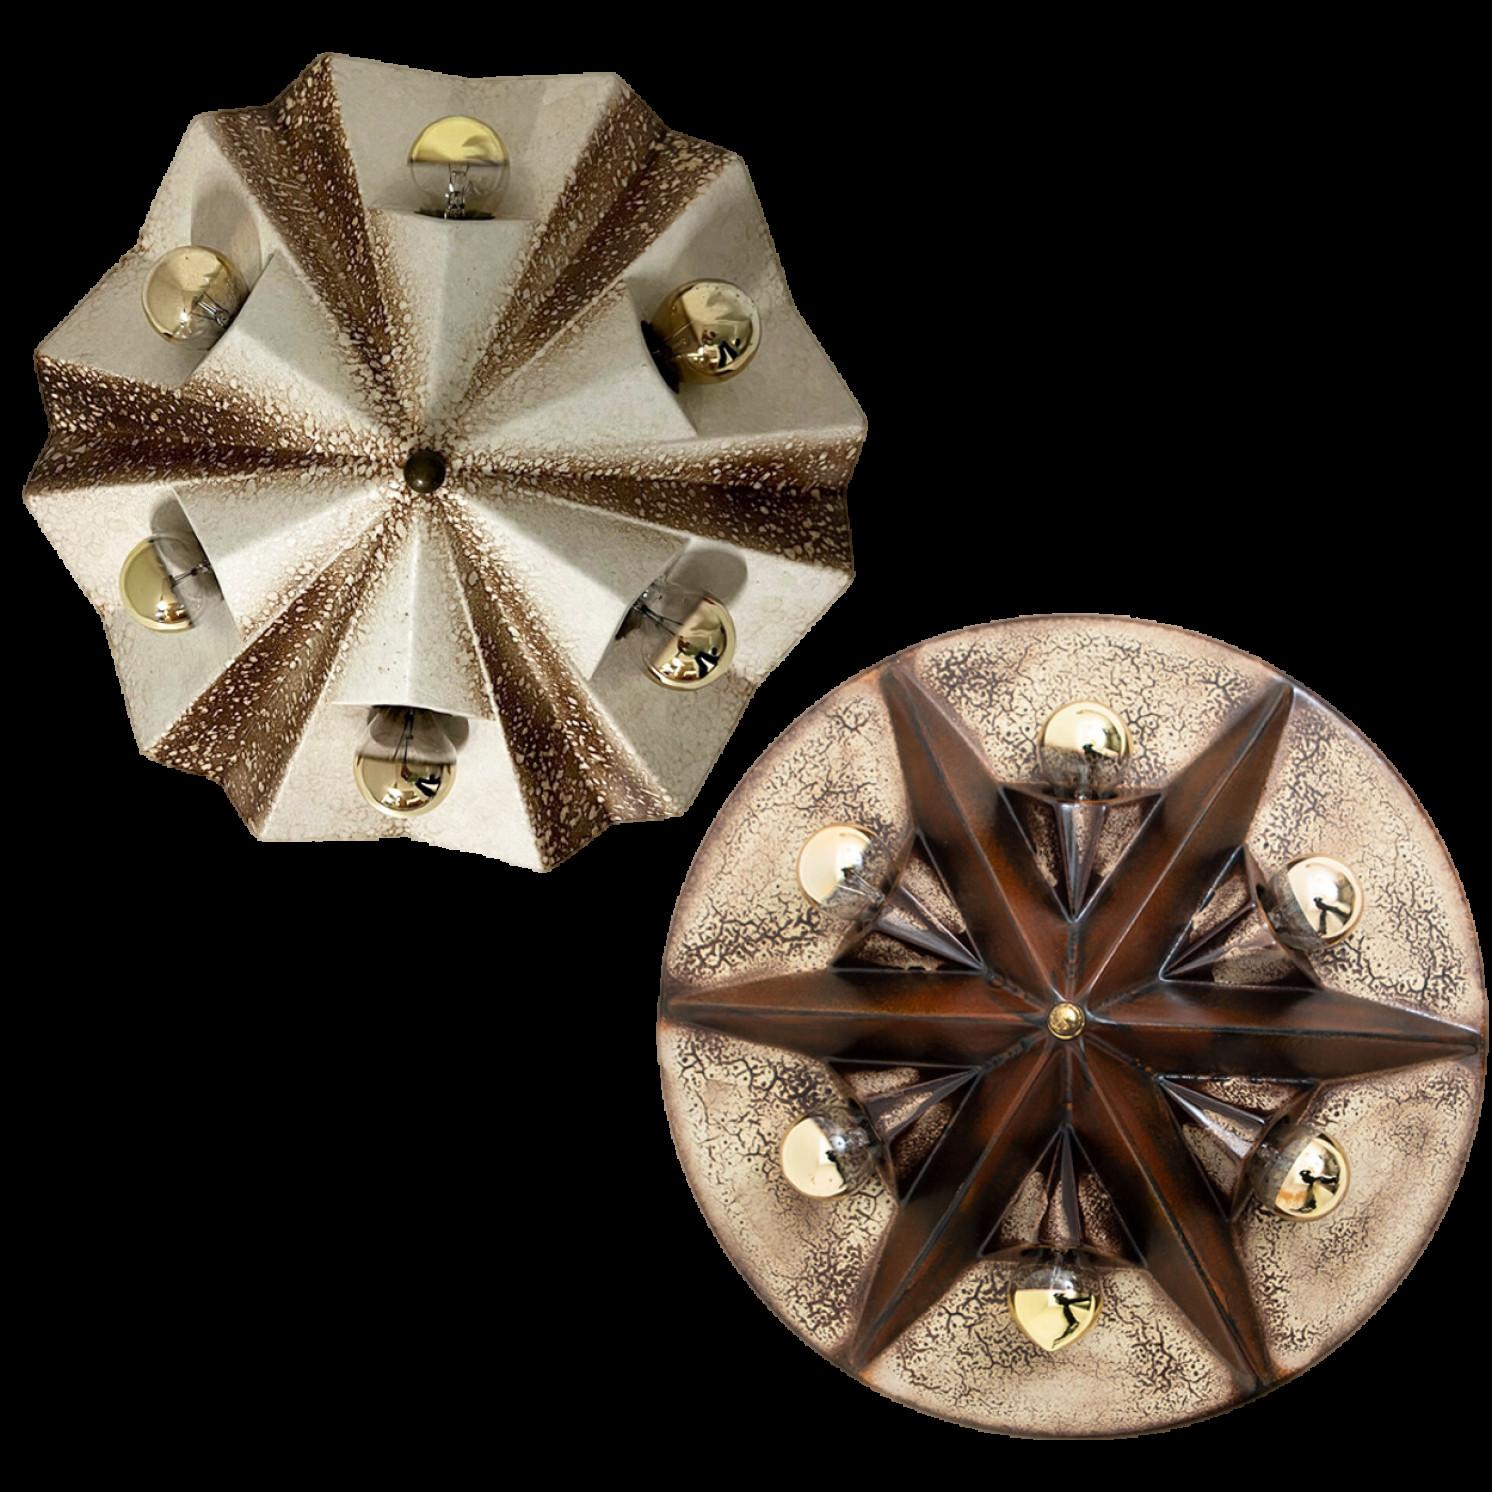 Beautiful and graphical star-shaped wall or ceiling lamps, made with brown and beige ceramic, manufactured in the 1970s in Germany.

We used gold mirror light bulbs (see images), but silver mirror, soft gold or white light bulbs are also very